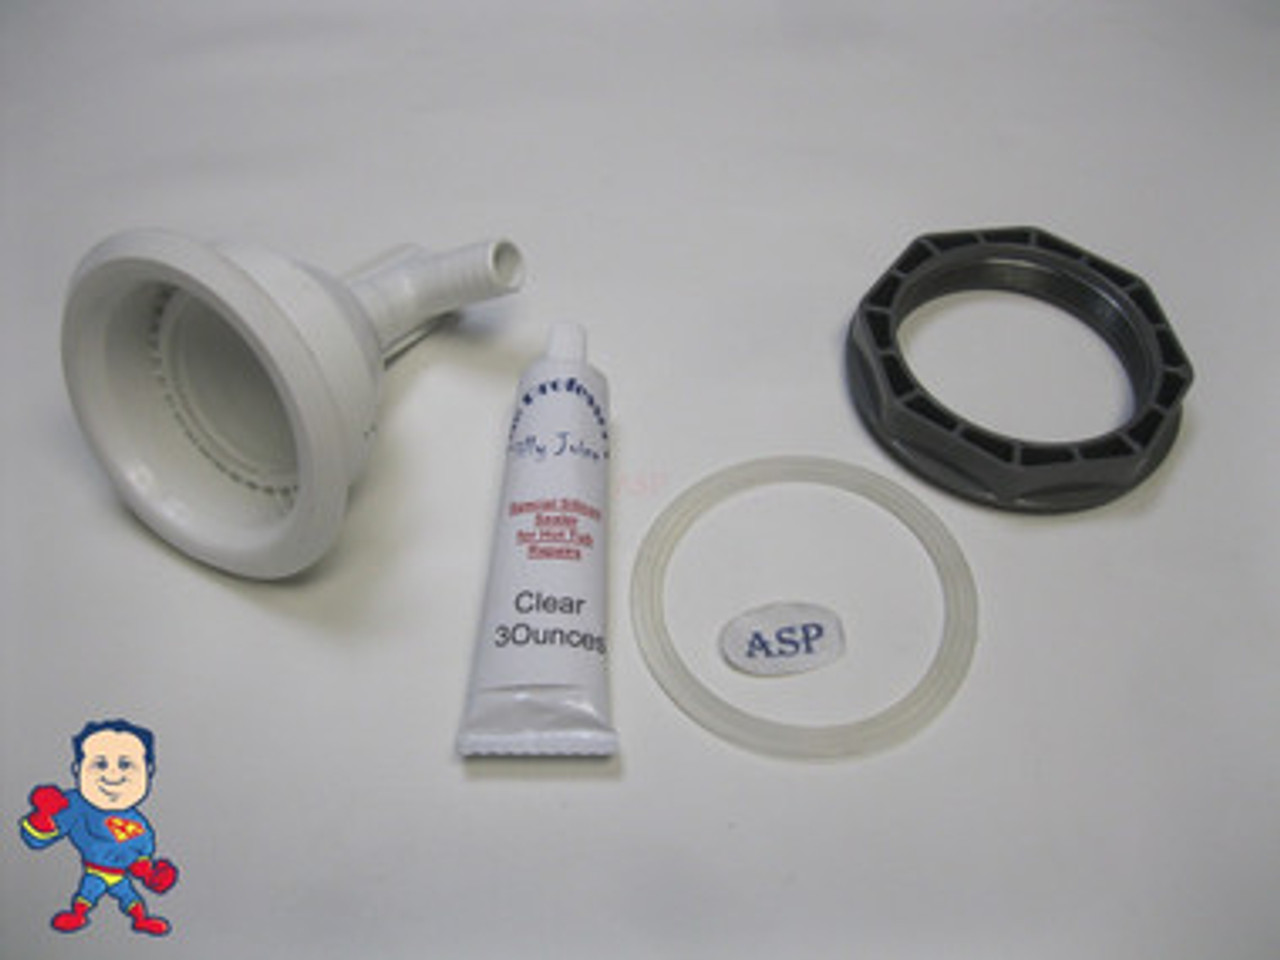 4 3/4" Wide, Jet Body Wall Fitting Kit, Pentair, Cyclone, Fits Jet Face Widths 5" to 6 1/2"